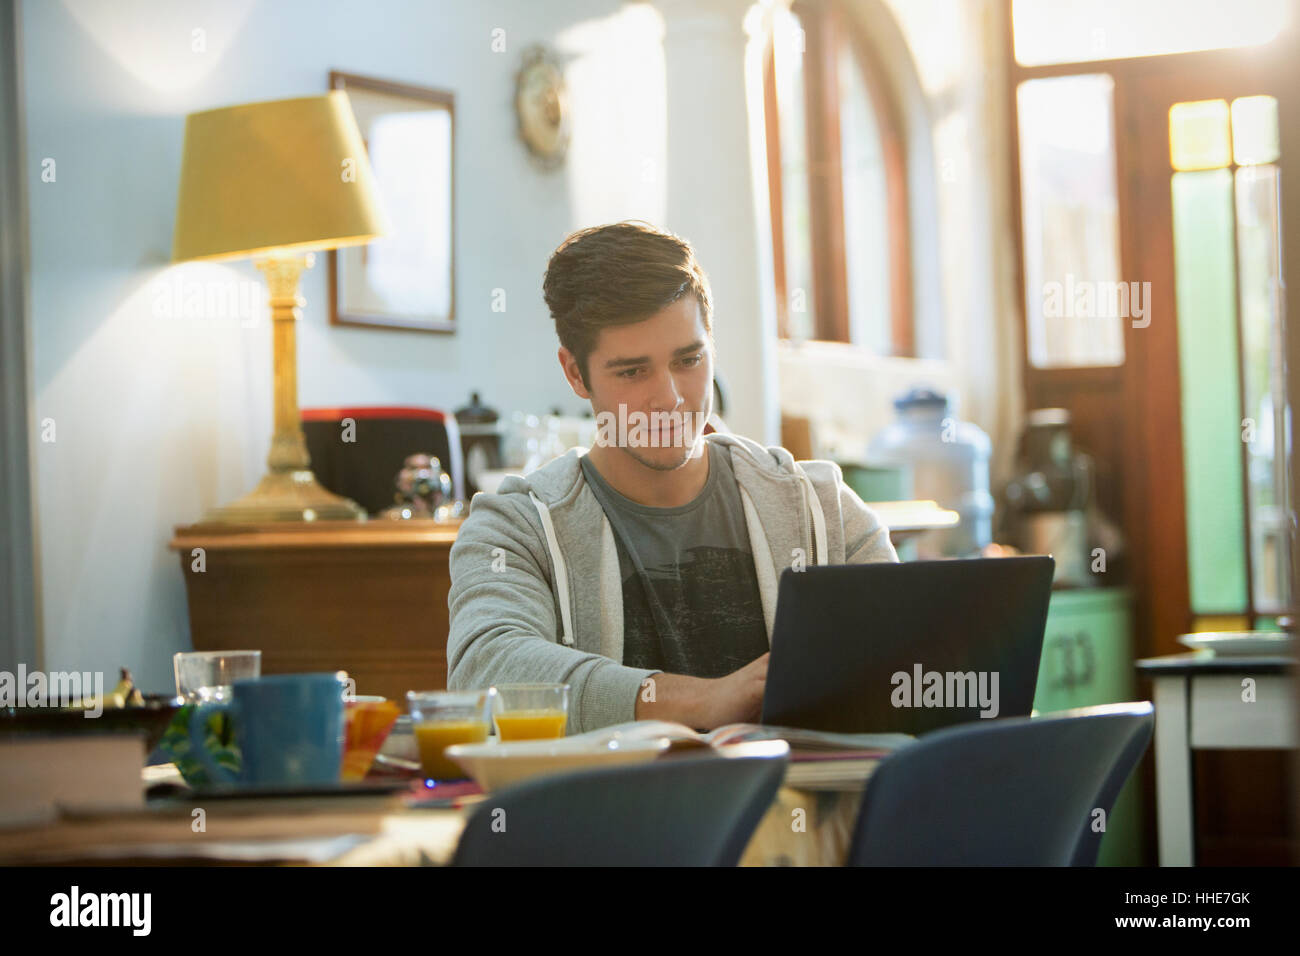 Young man college student studying at laptop Stock Photo